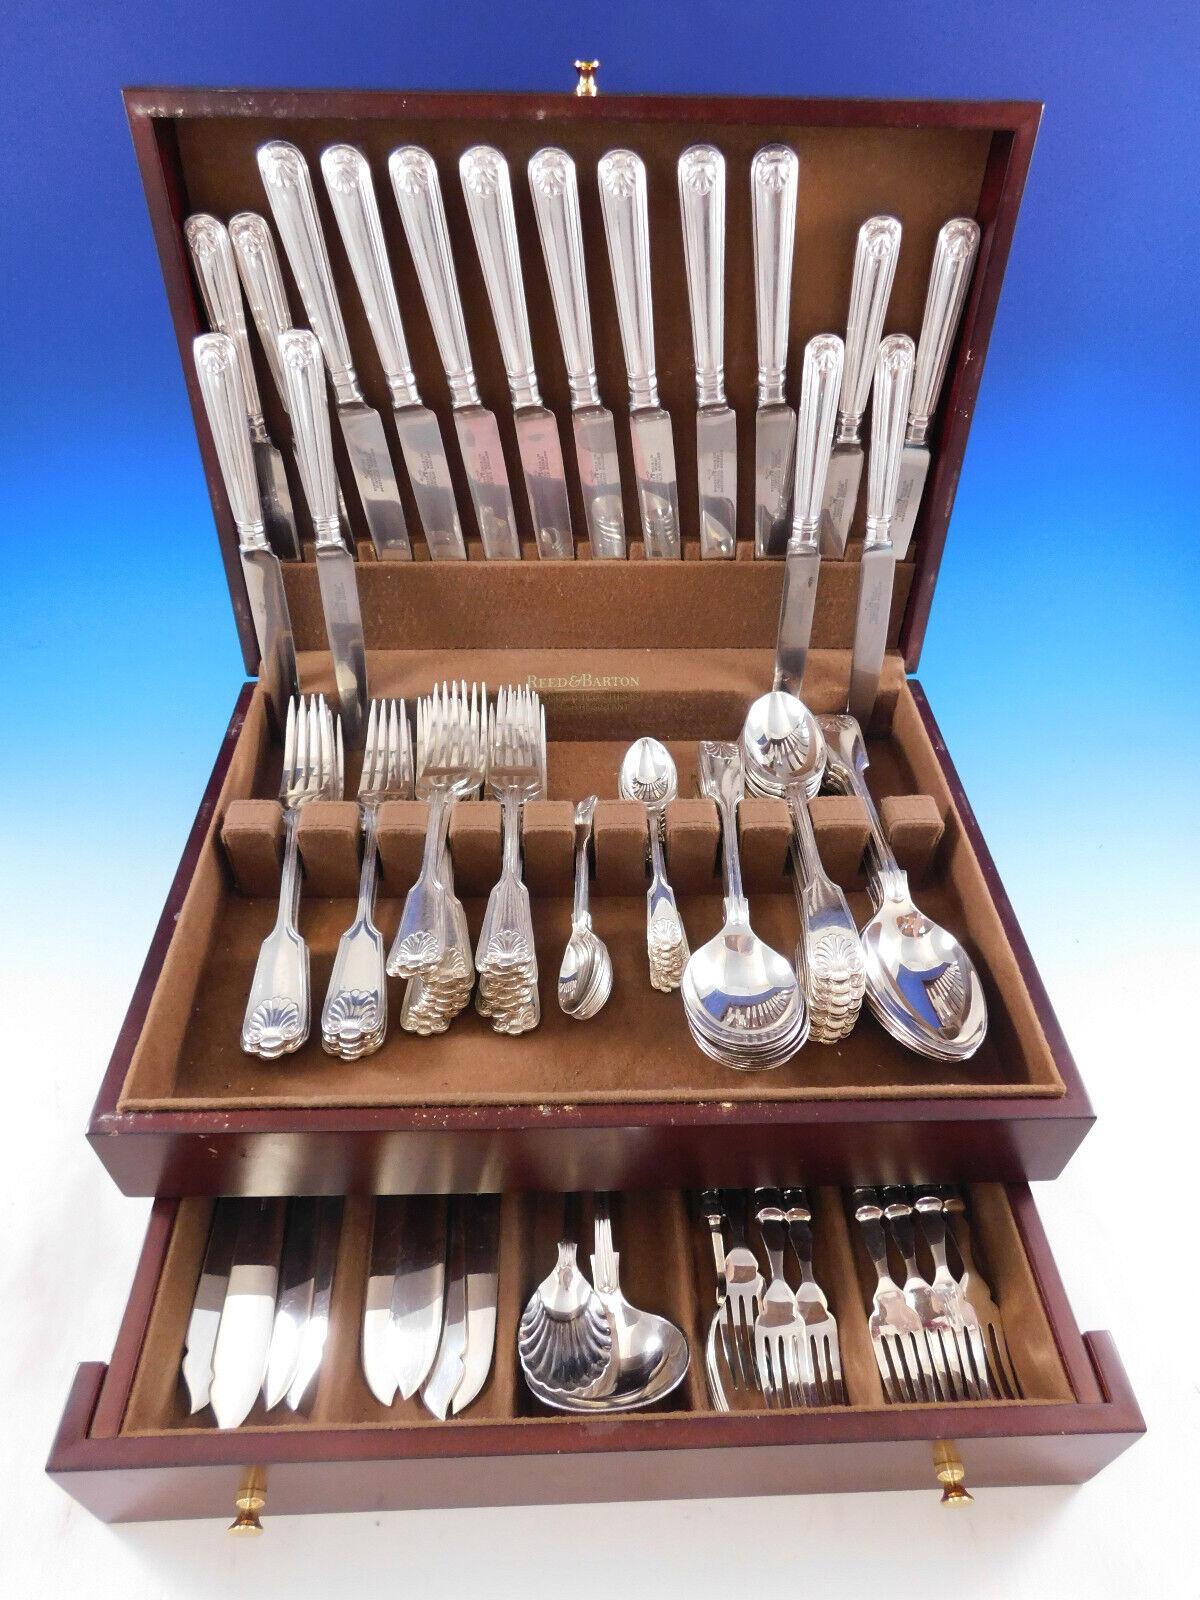 Superb Fiddle Shell by Robert Belk English Silverplated Flatware set, 94 pieces. This set includes:

8 Large Dinner Size Knives, 10